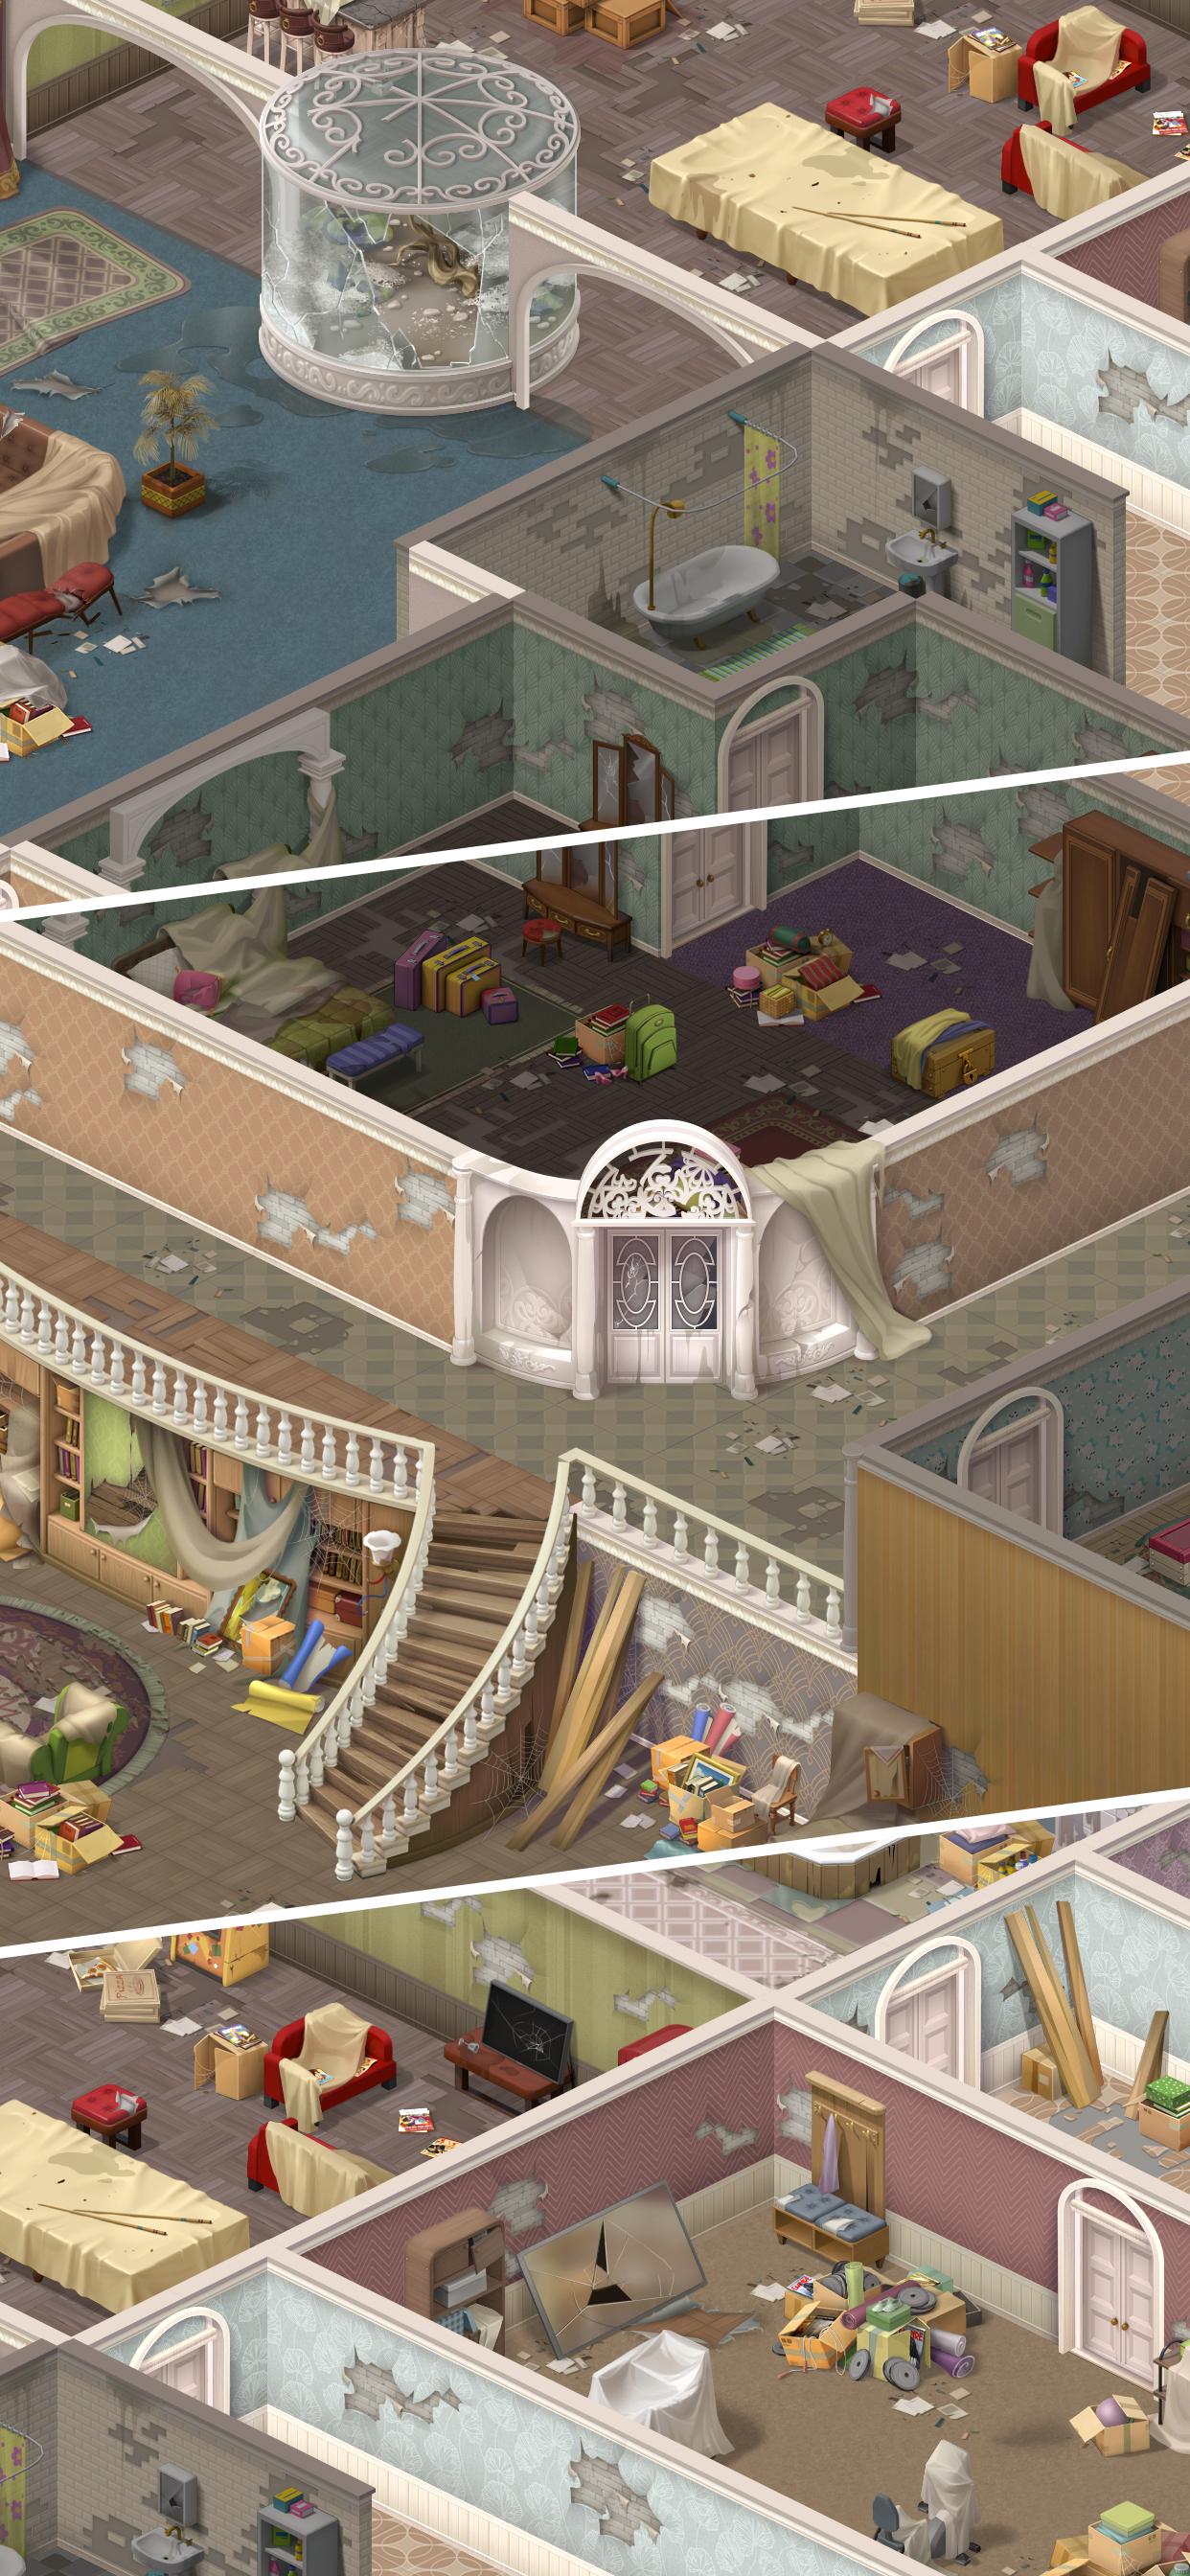 Merge Matters Home renovation game with a twist 8.8.03 Screenshot 5